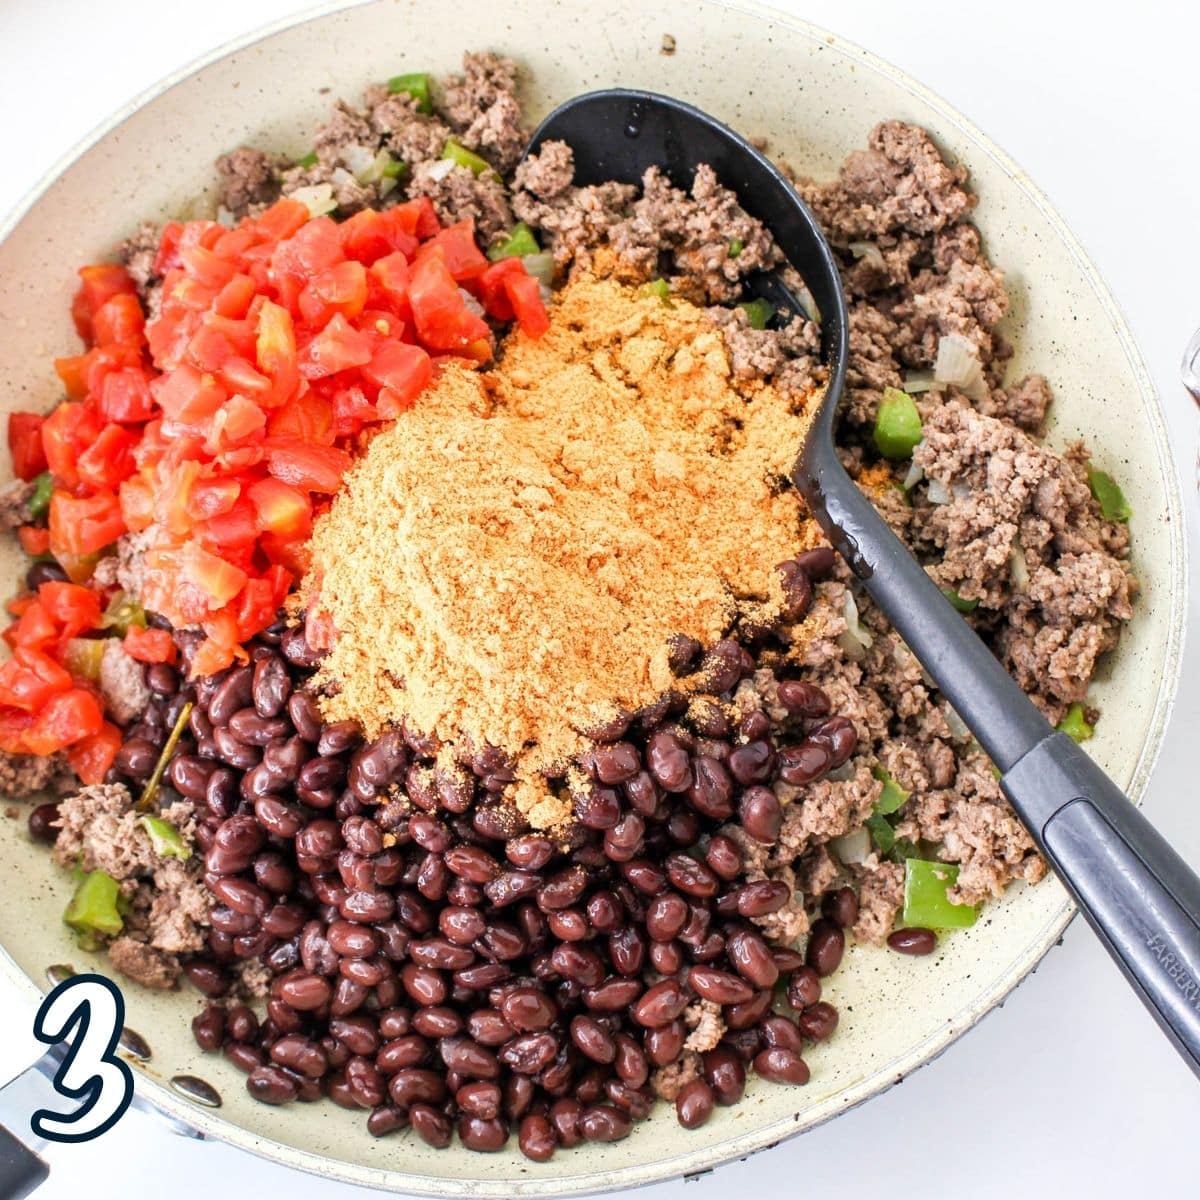 Beans and diced tomatoes added to cooked ground meat in a skillet. 